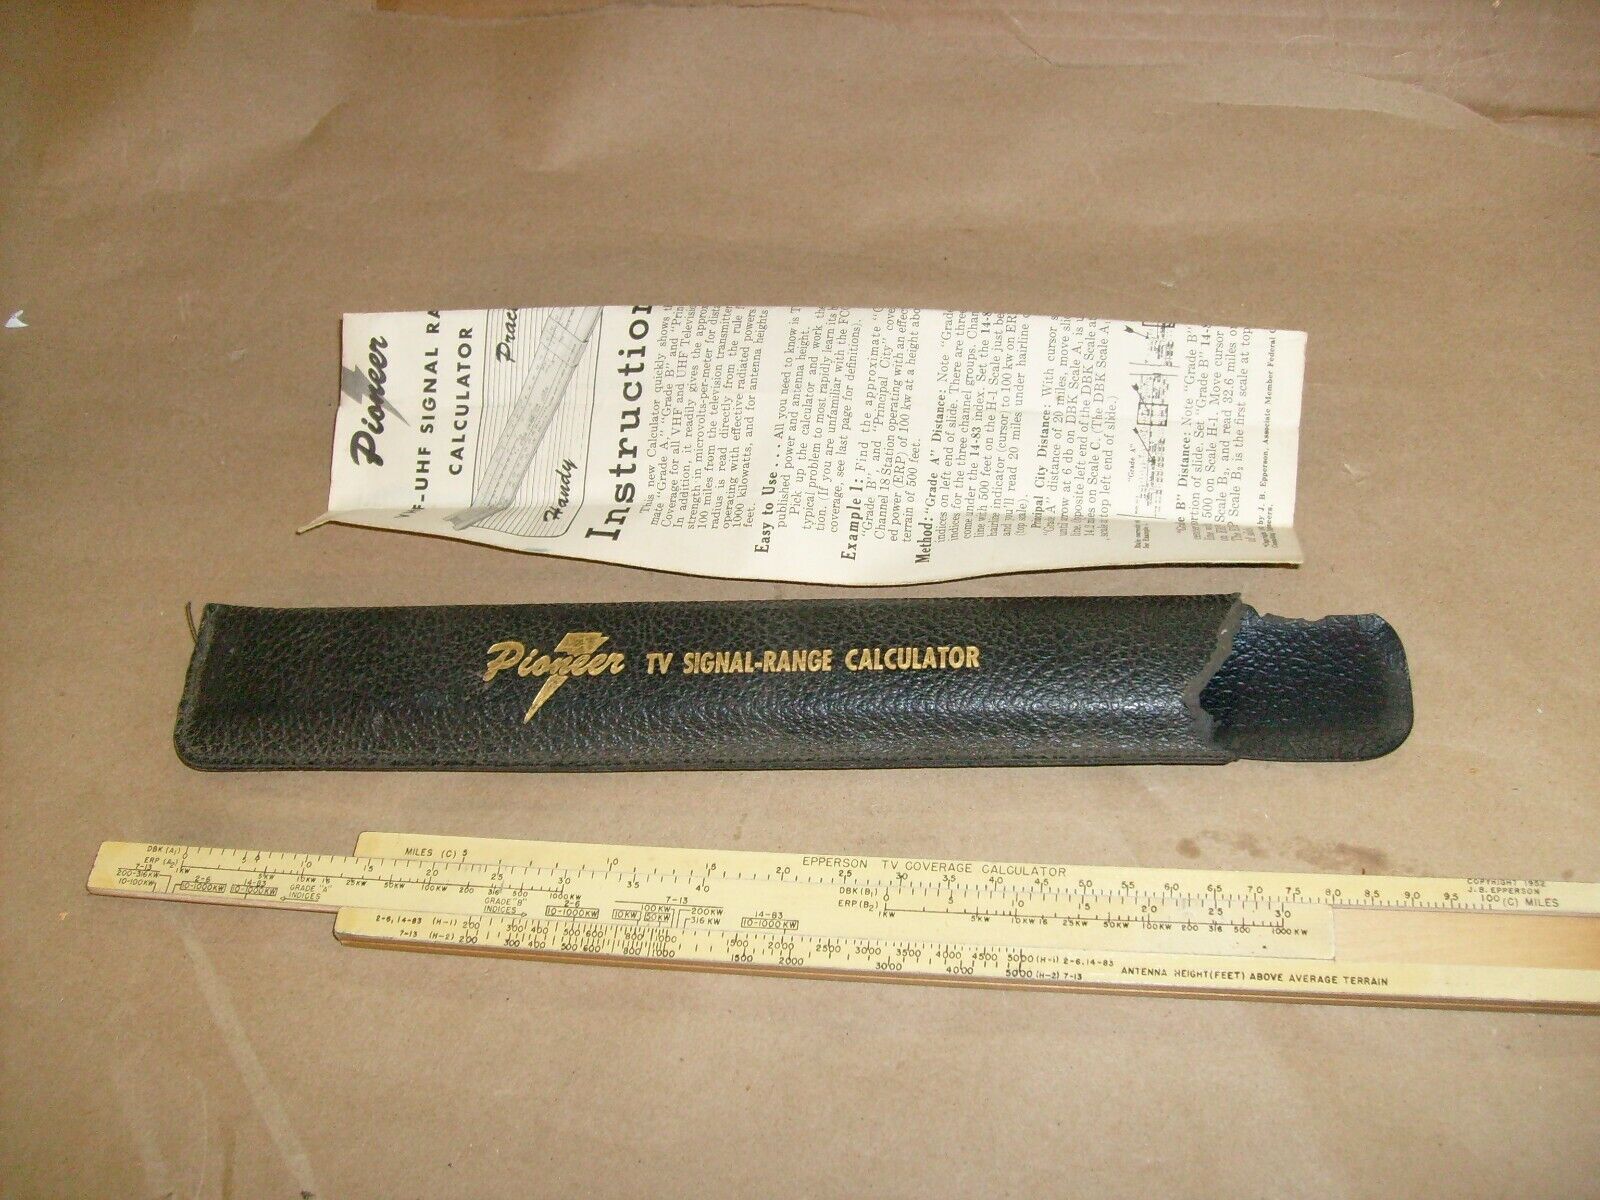 1952 Pioneer TV Signal Range Calculator - Slide ruler with directions - Epperson